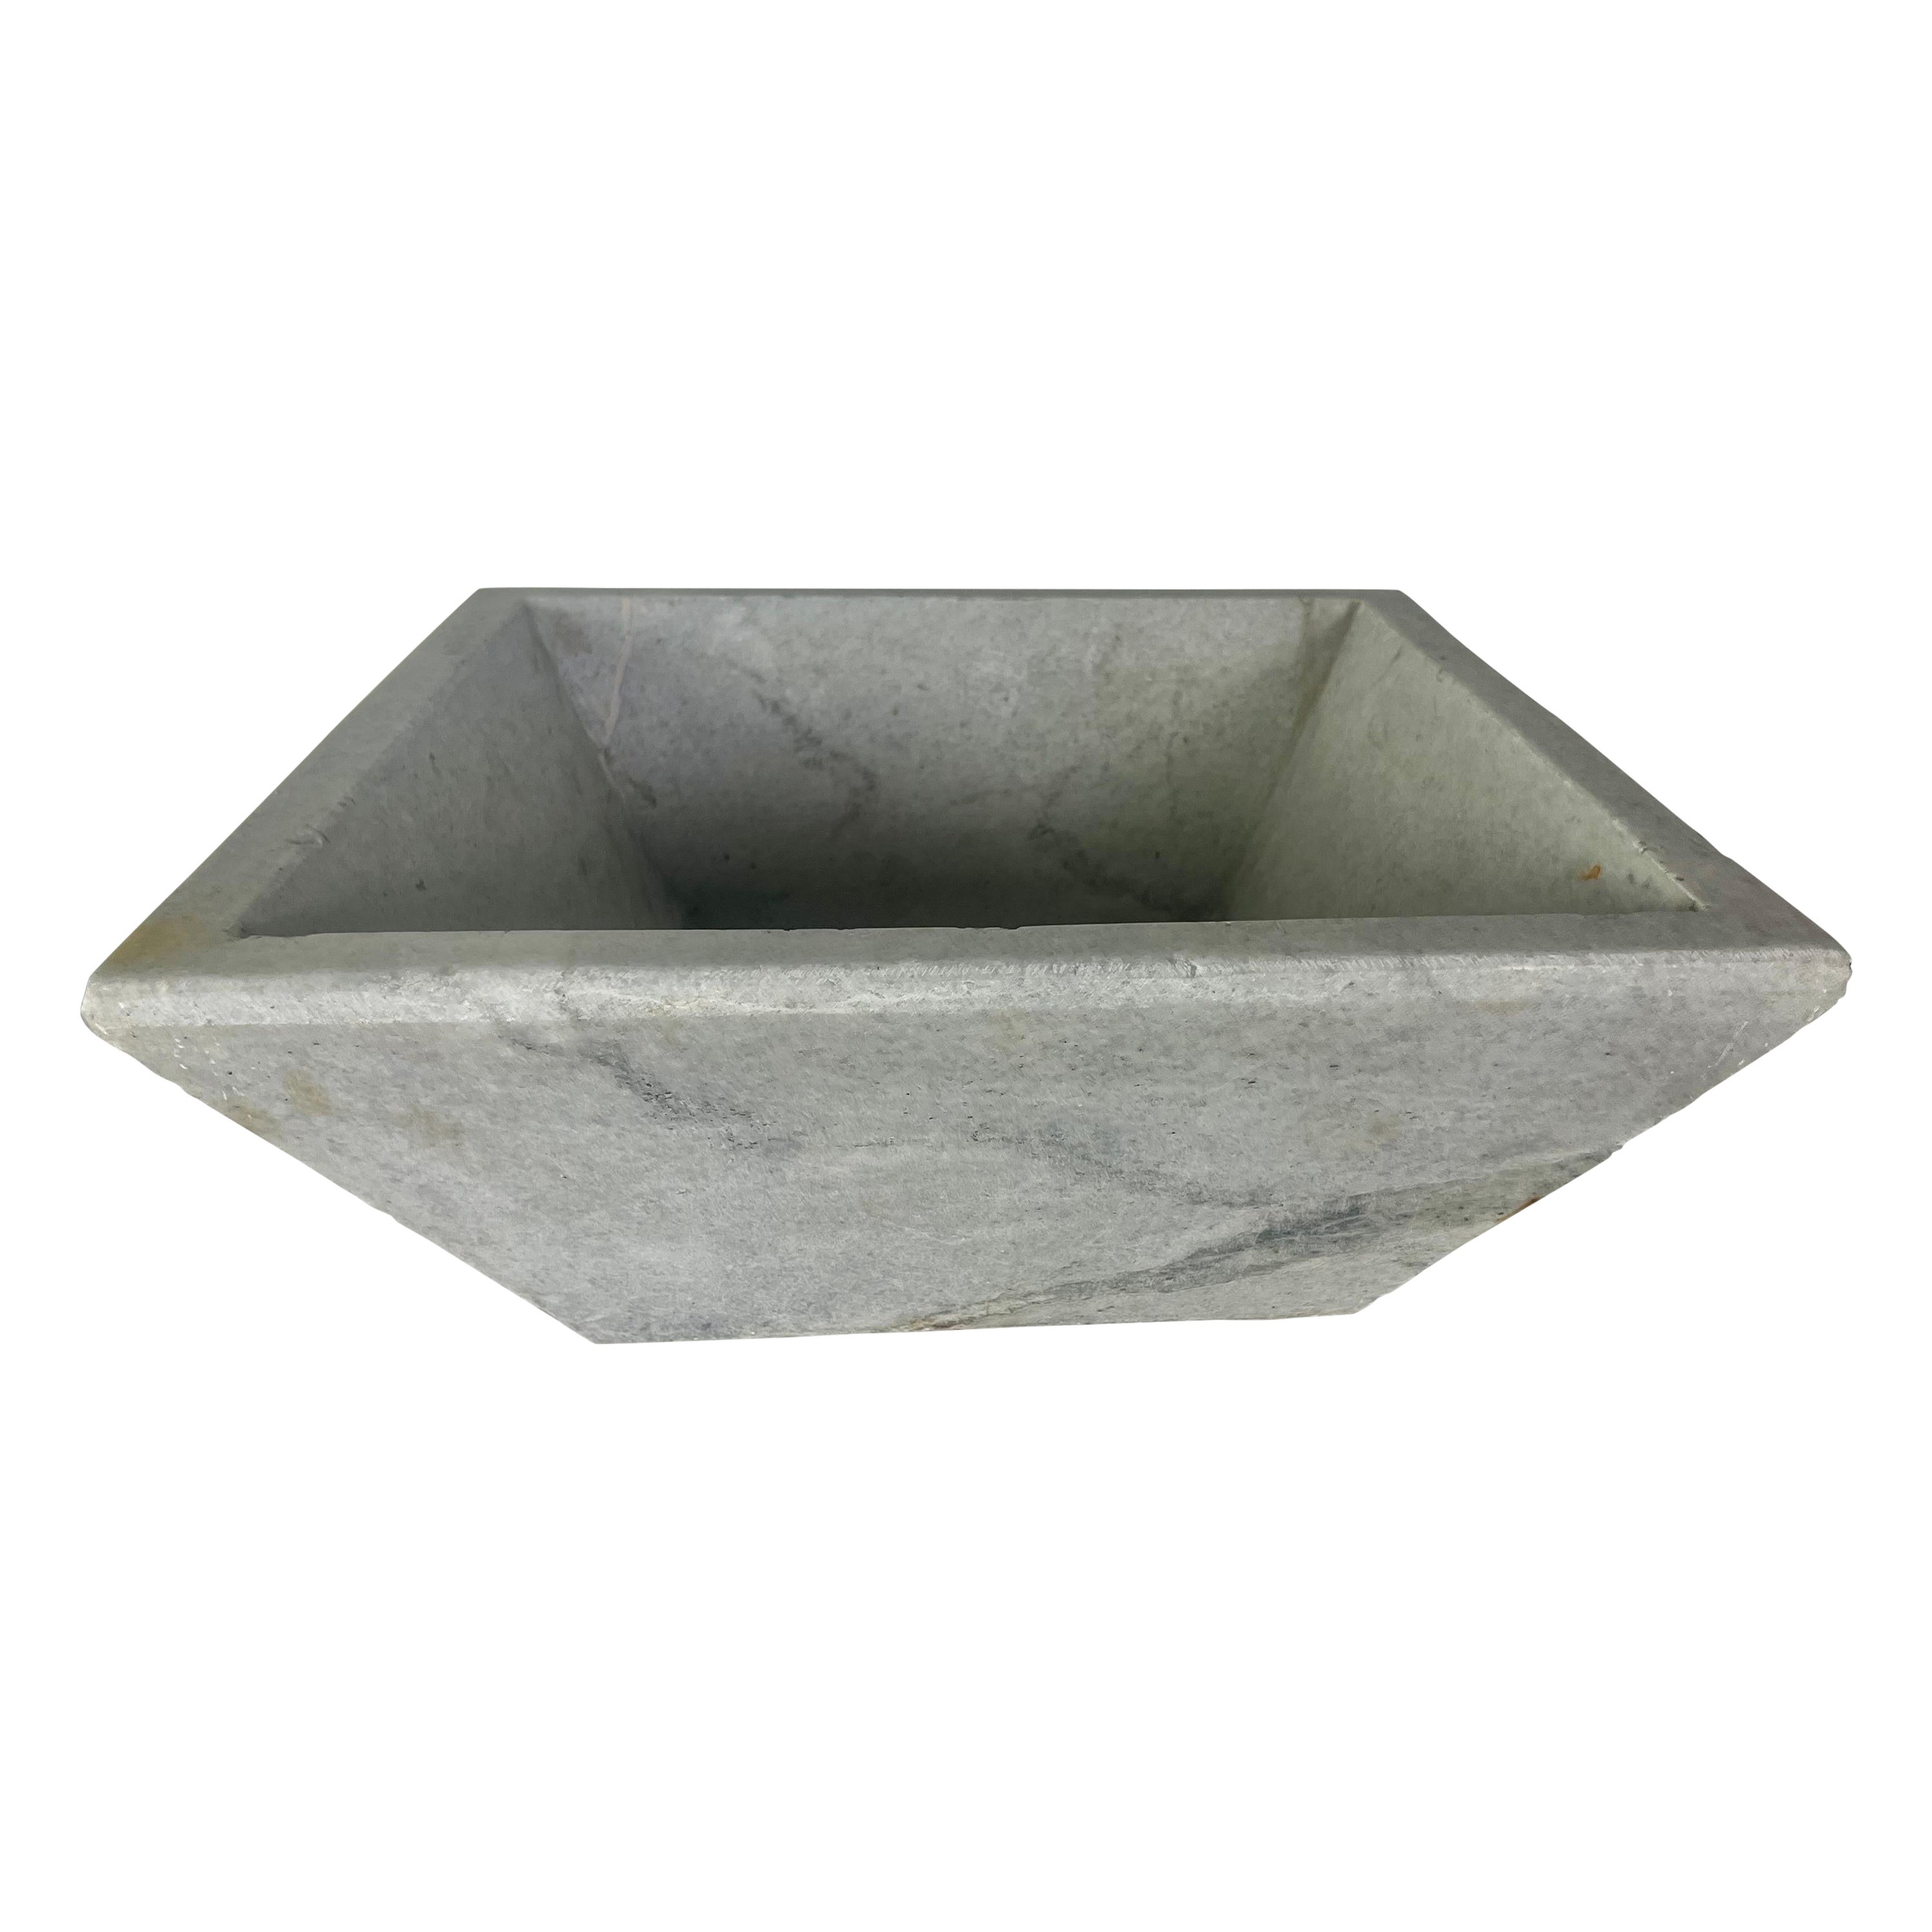 MId 20th C. Italian Stone Sink  For Sale